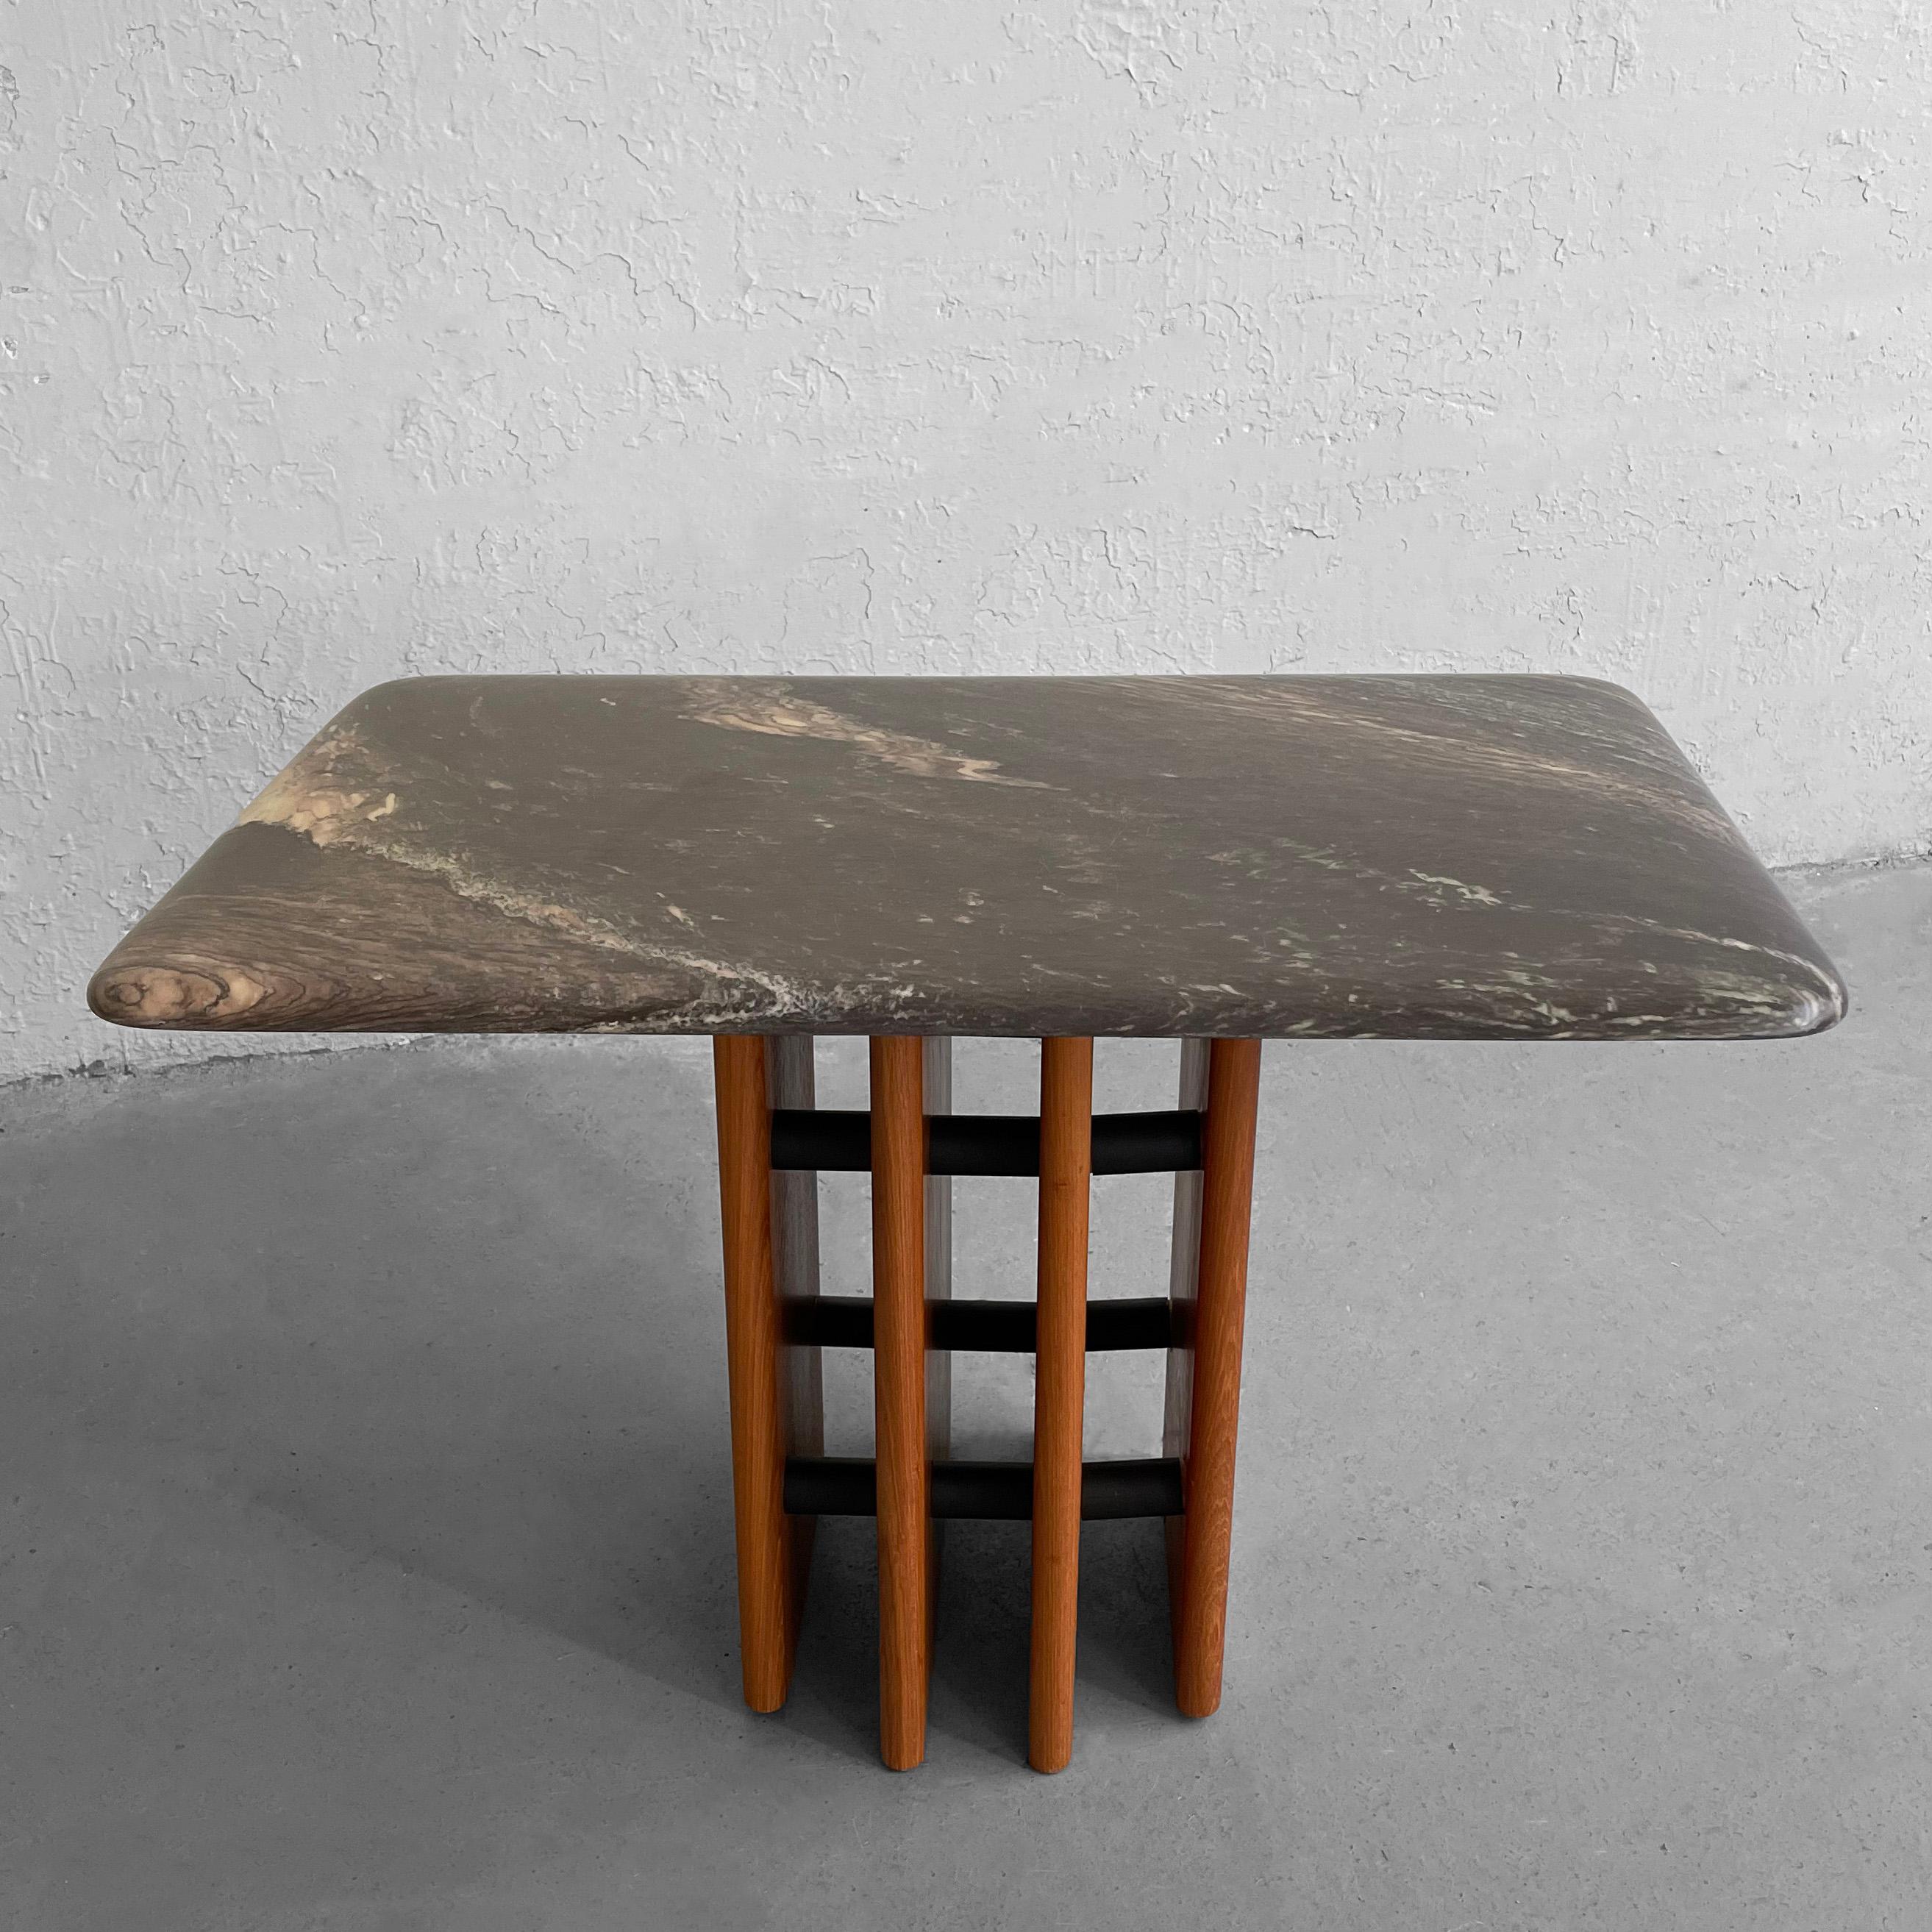 Interesting, Danish modern, side table attributed to the maker Marmorhuset features a black and beige grain marble top with a graduated teak paneled base with laminate bracing.